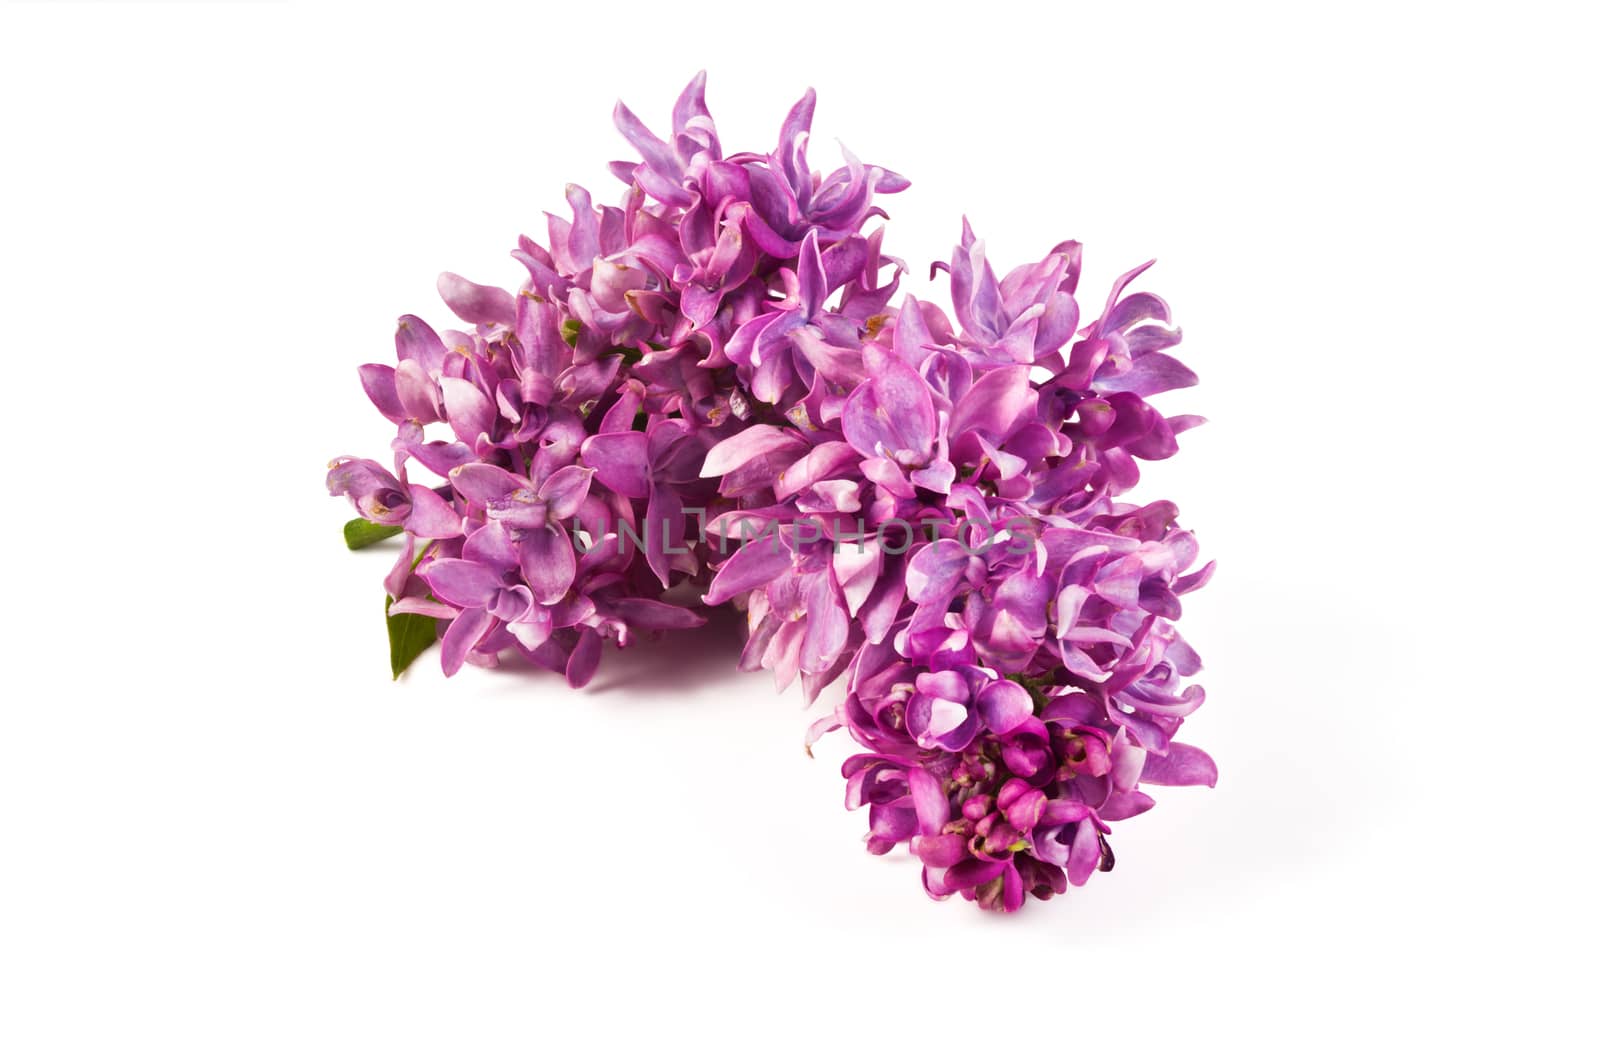 fragrant flowers of lilac inflorescence on white background